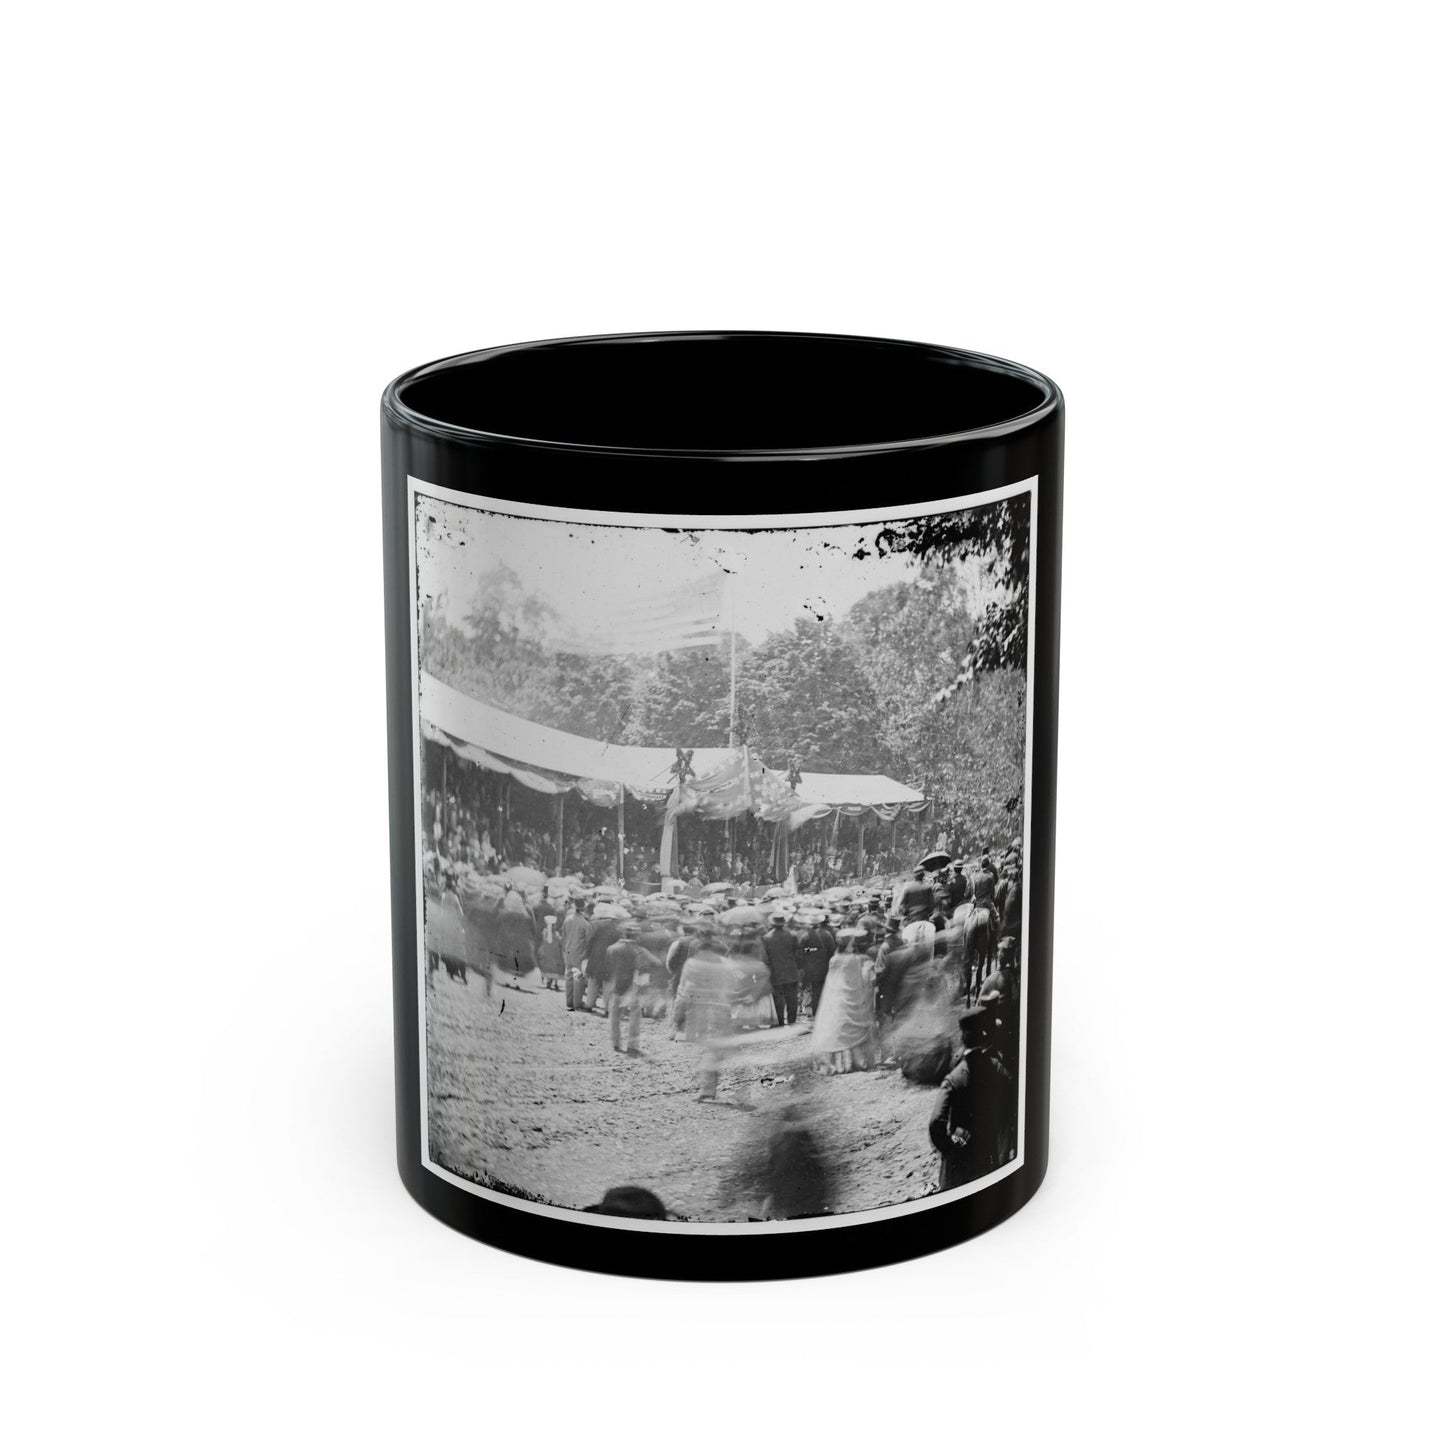 Washington, D.C. Crowd In Front Of Presidential Reviewing Stand (U.S. Civil War) Black Coffee Mug